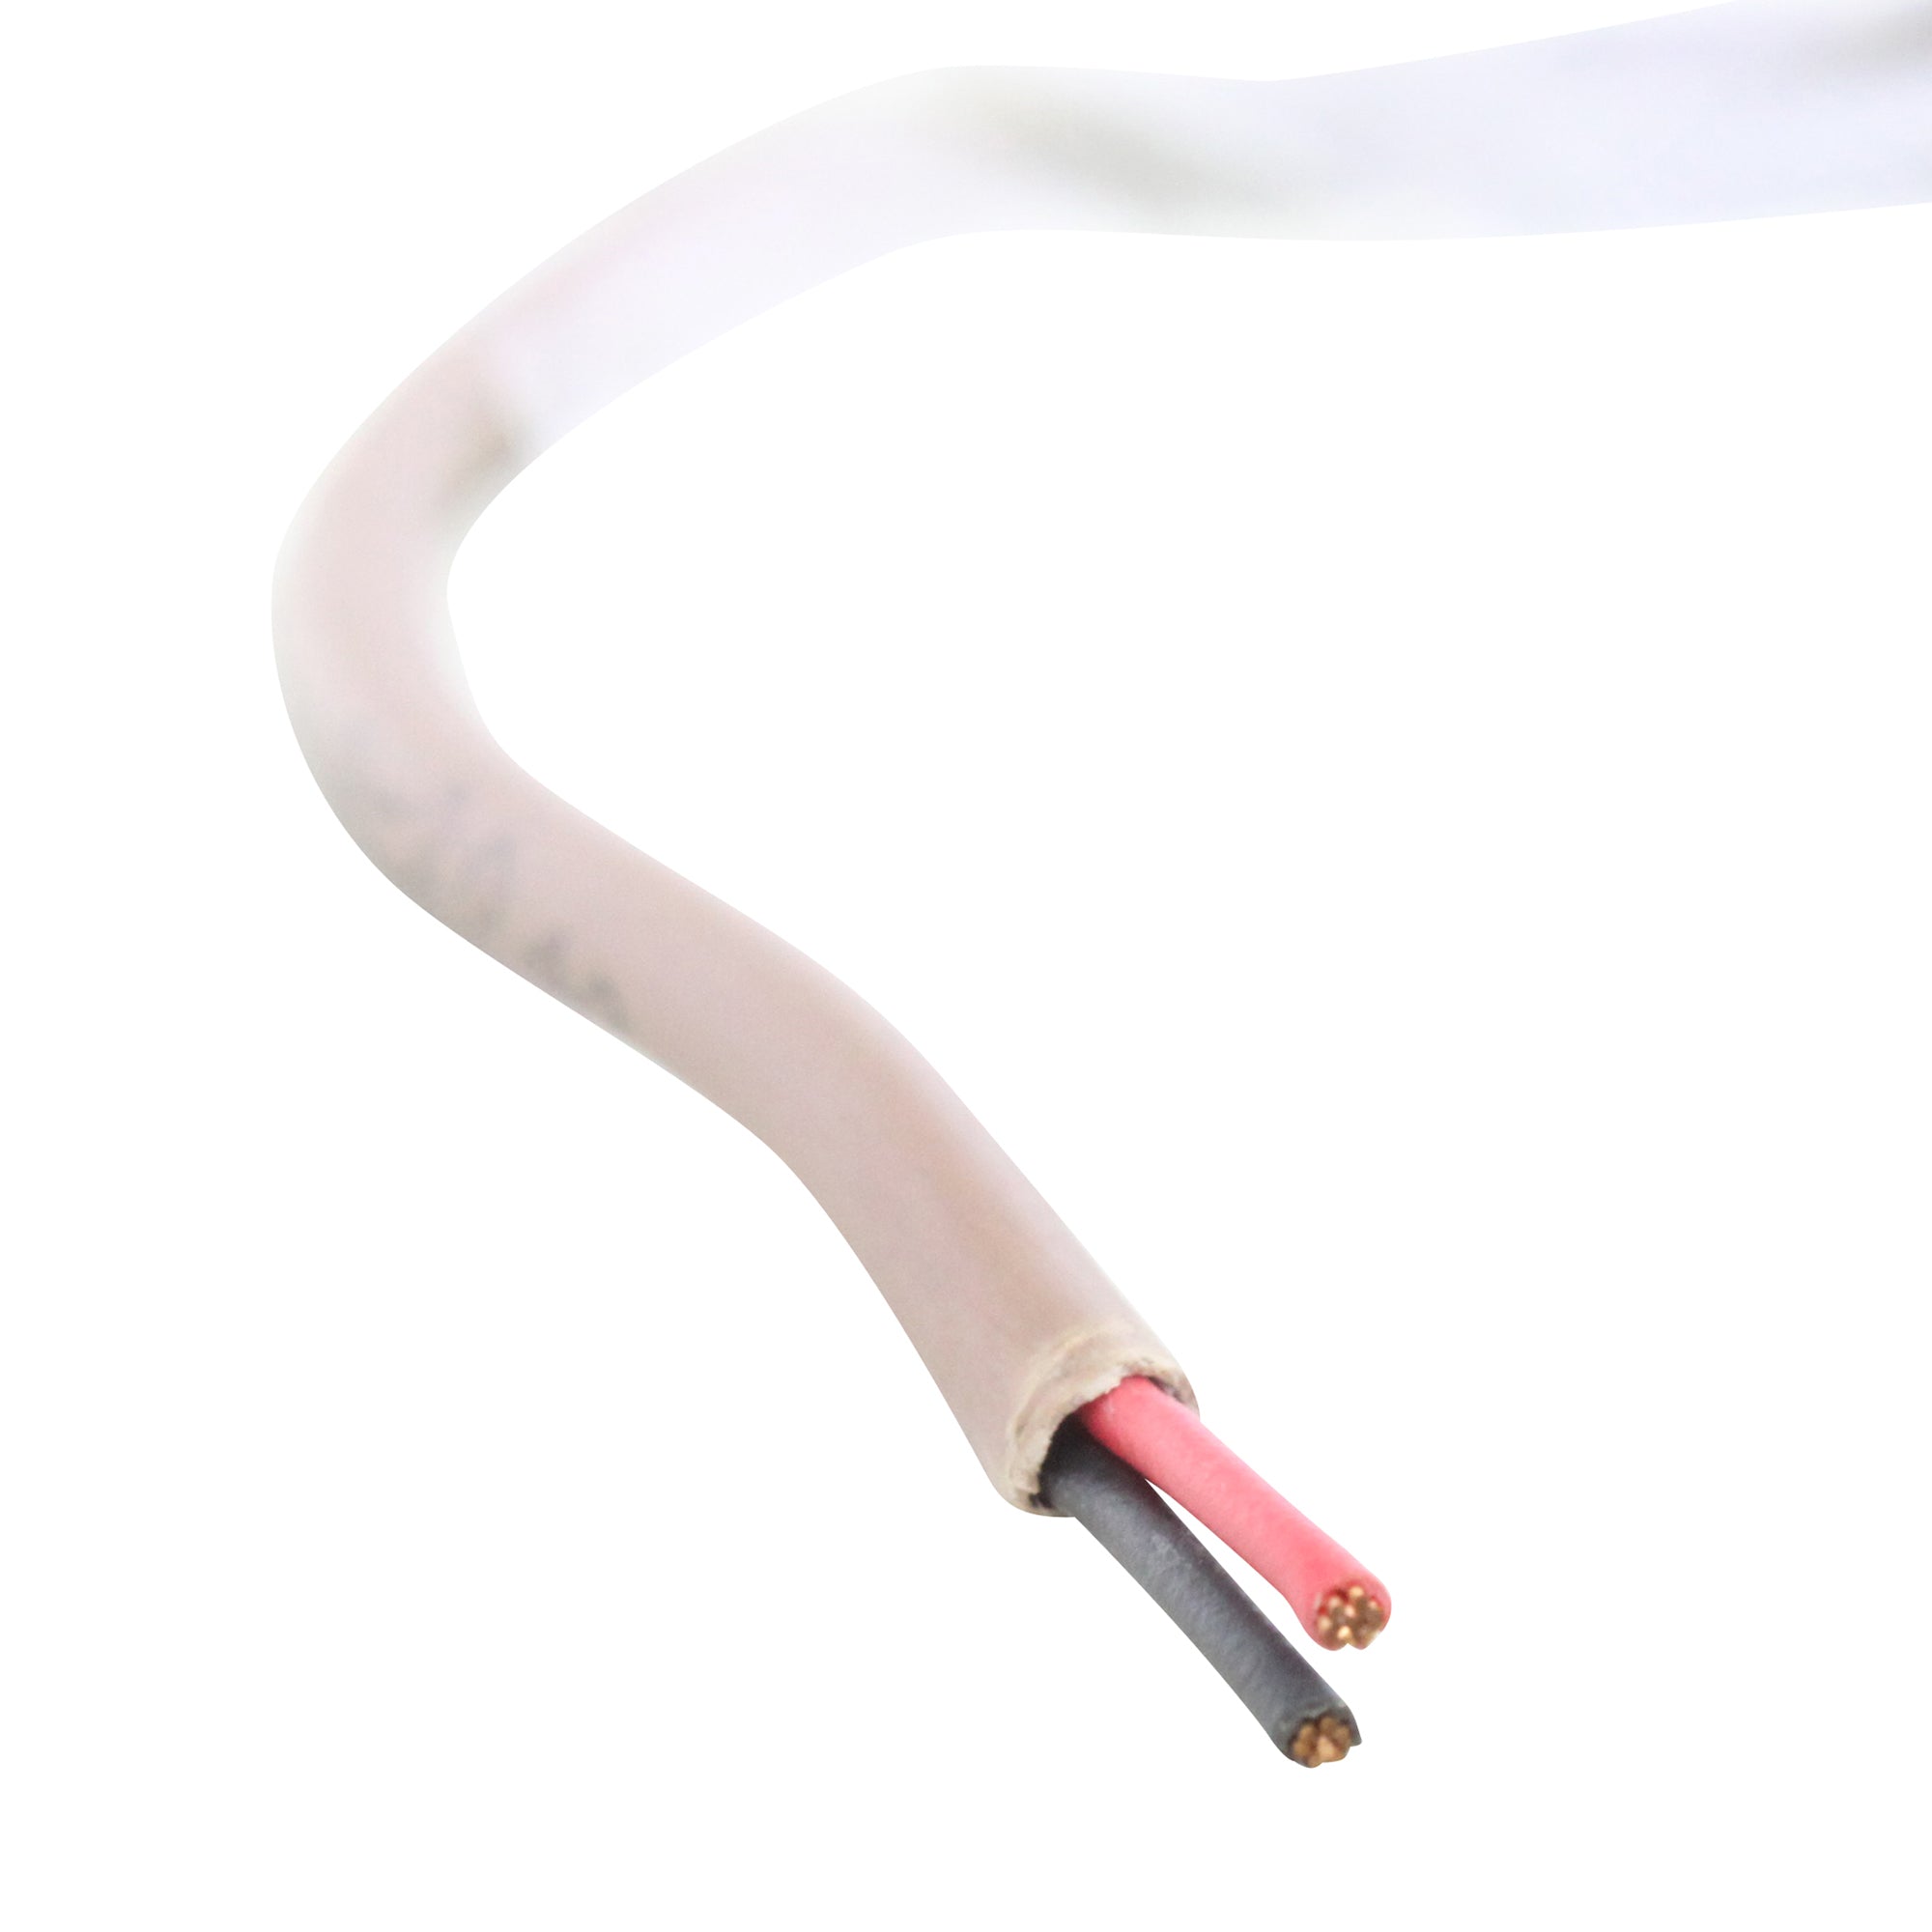 FASTER CABLE, FASTER CABLE P222C-TAN 22AWG 2C, 22/2 STR CMP PLENUM CONTROL CABLE, TAN, 1000'